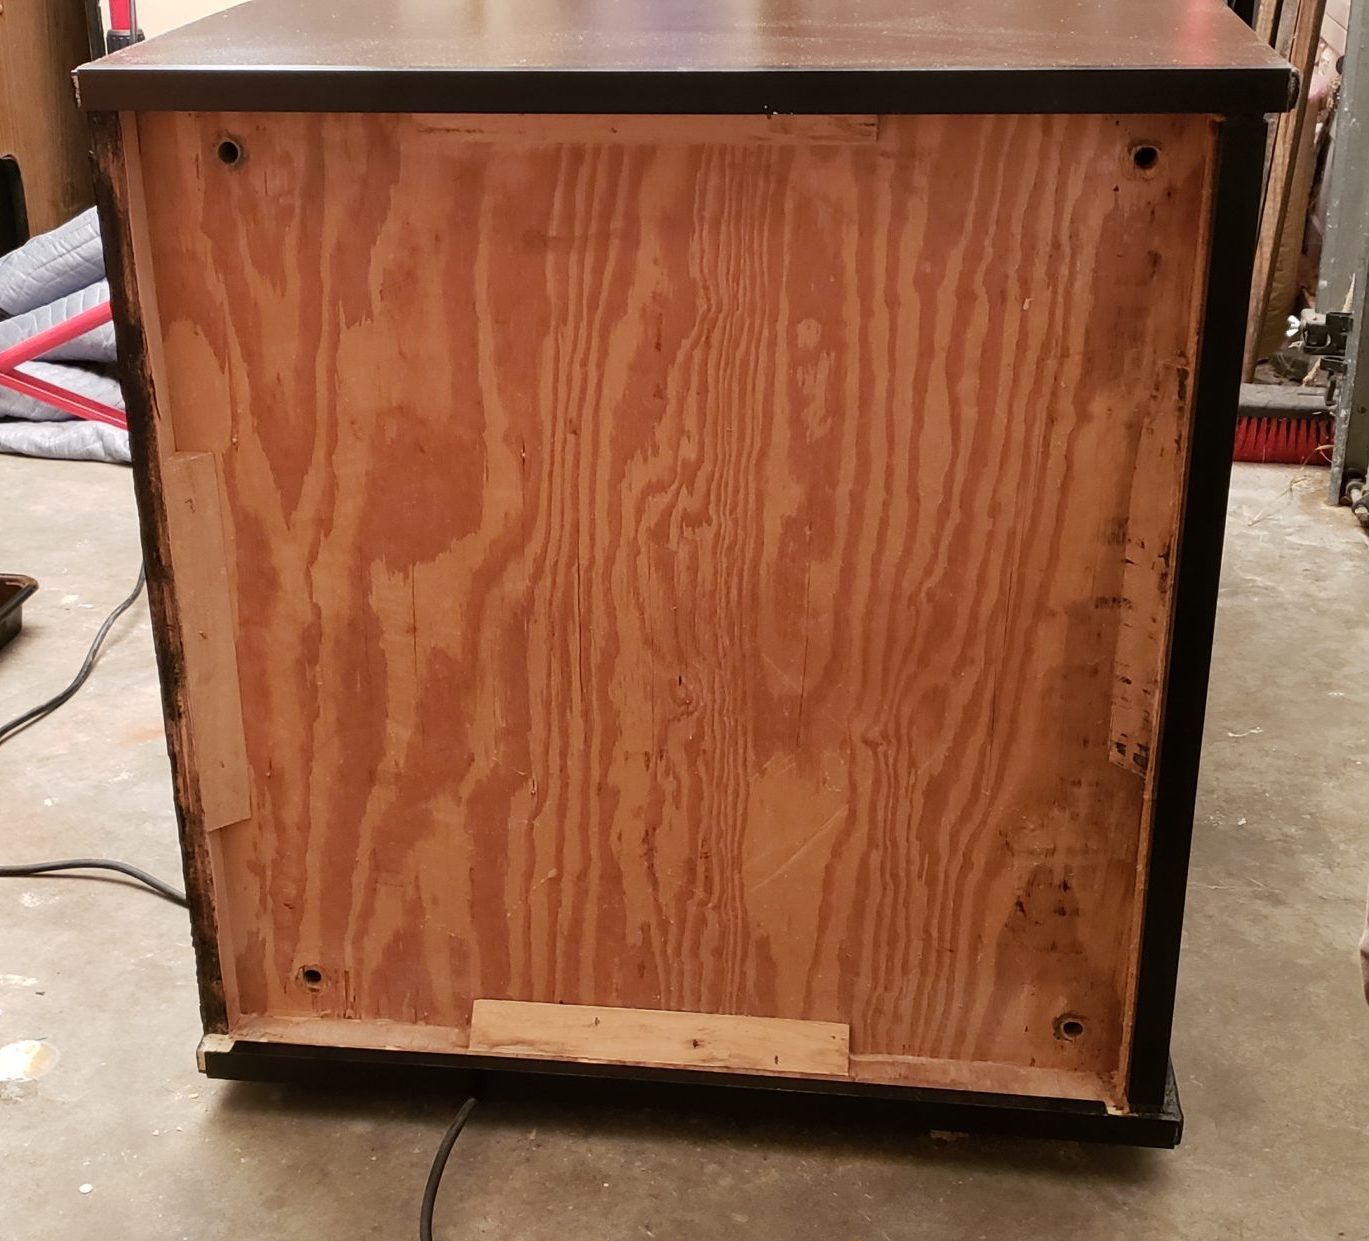 bottom of cabinet with no feet